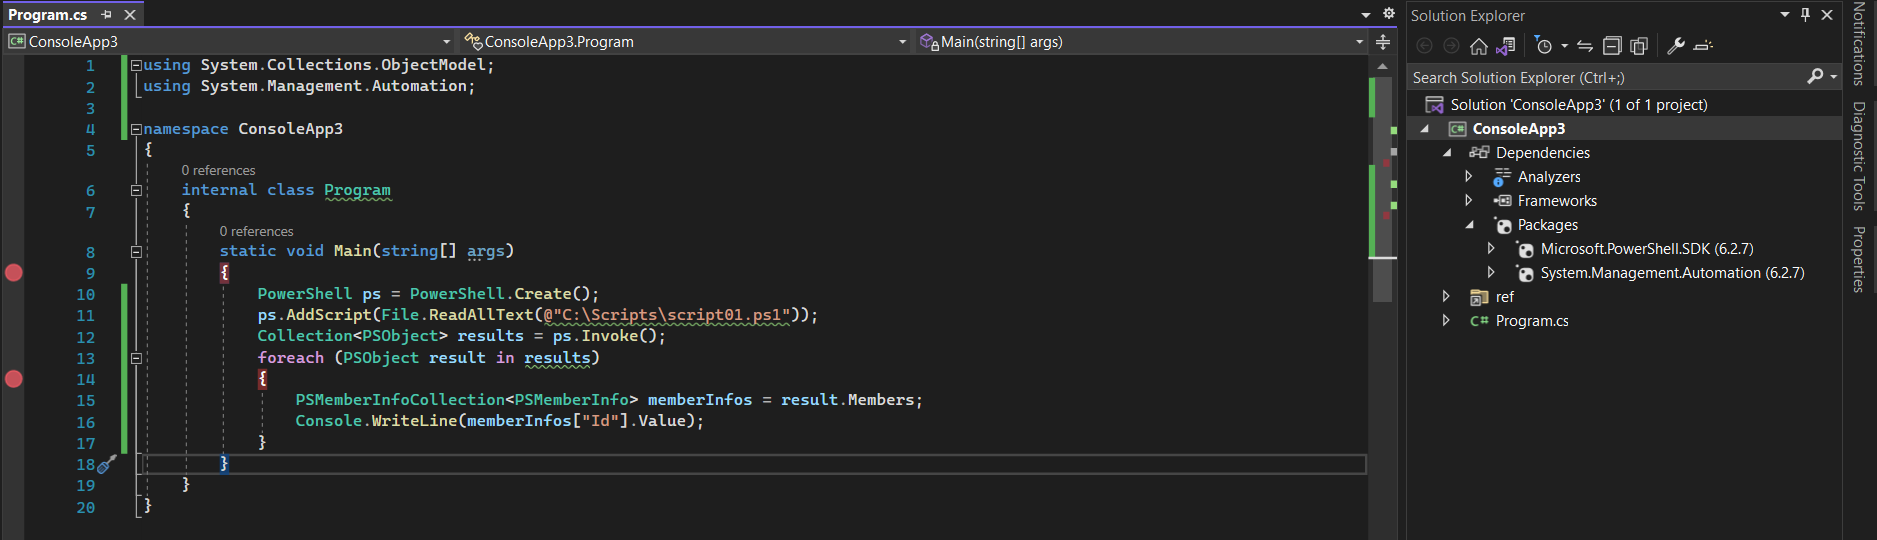 Asynchronously Execute PowerShell Scripts from C# - CodeProject